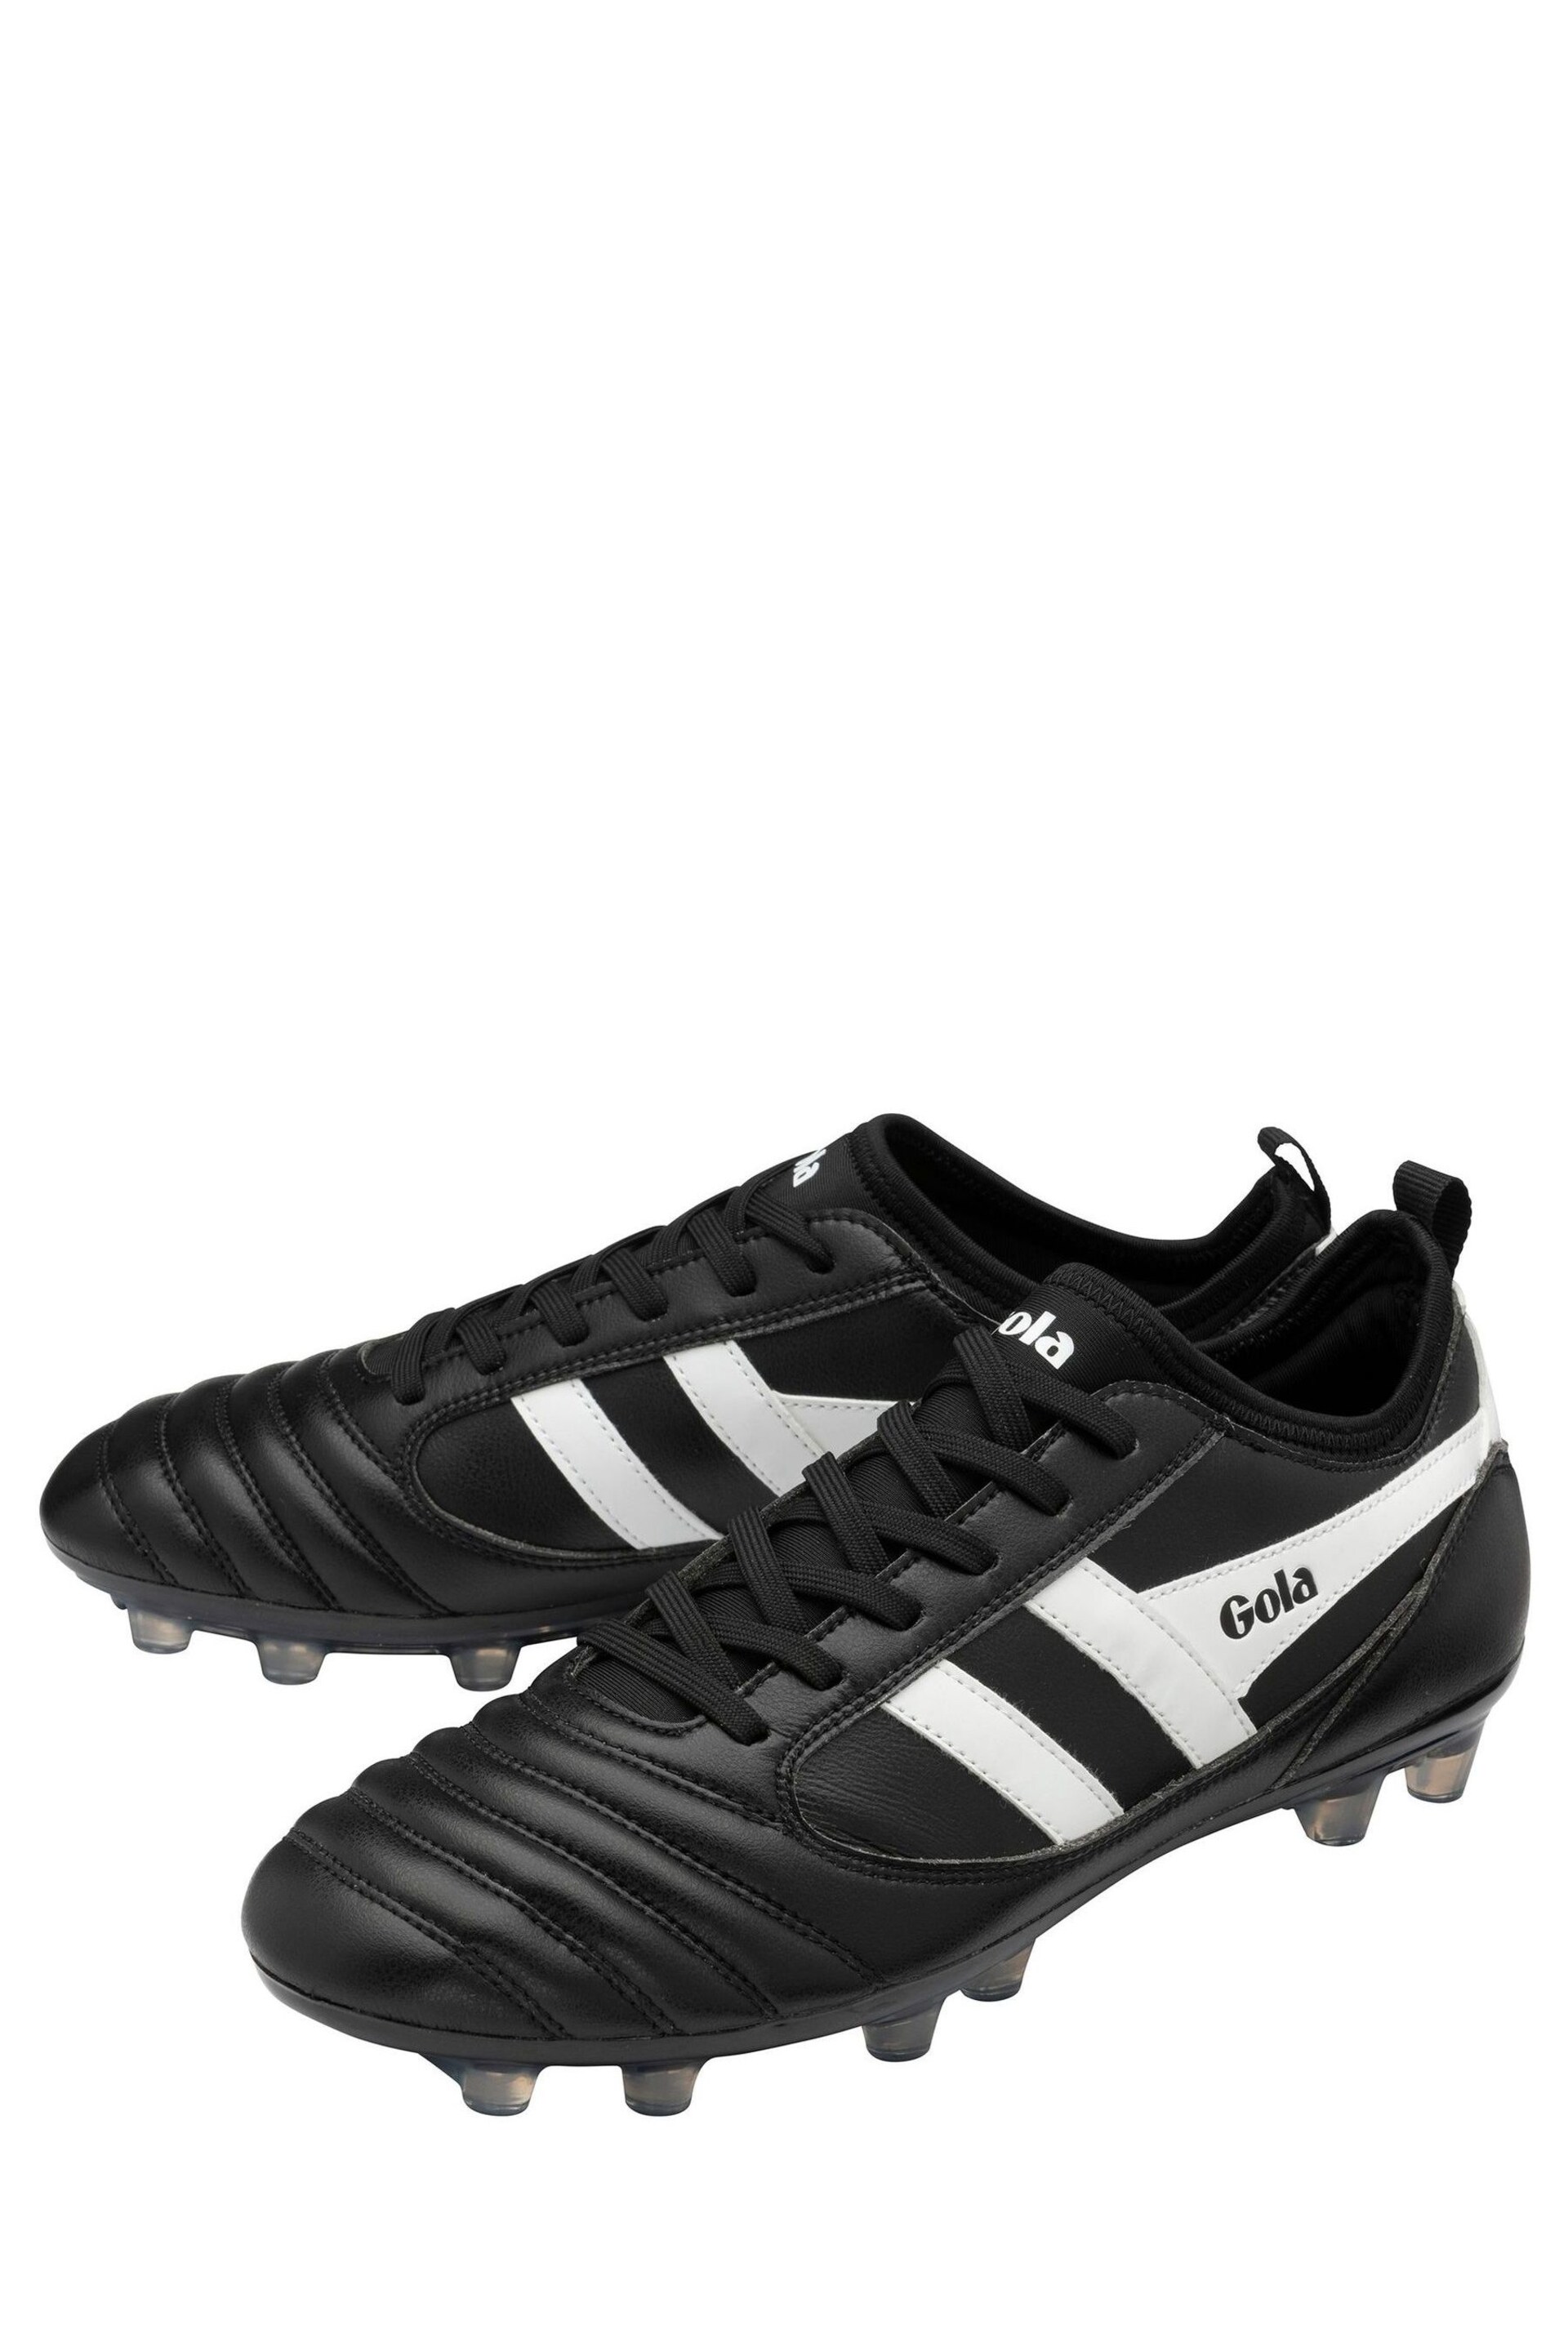 Gola Black Juniors Ceptor MLD Pro Microfibre Lace-Up Football Boots - Image 2 of 5